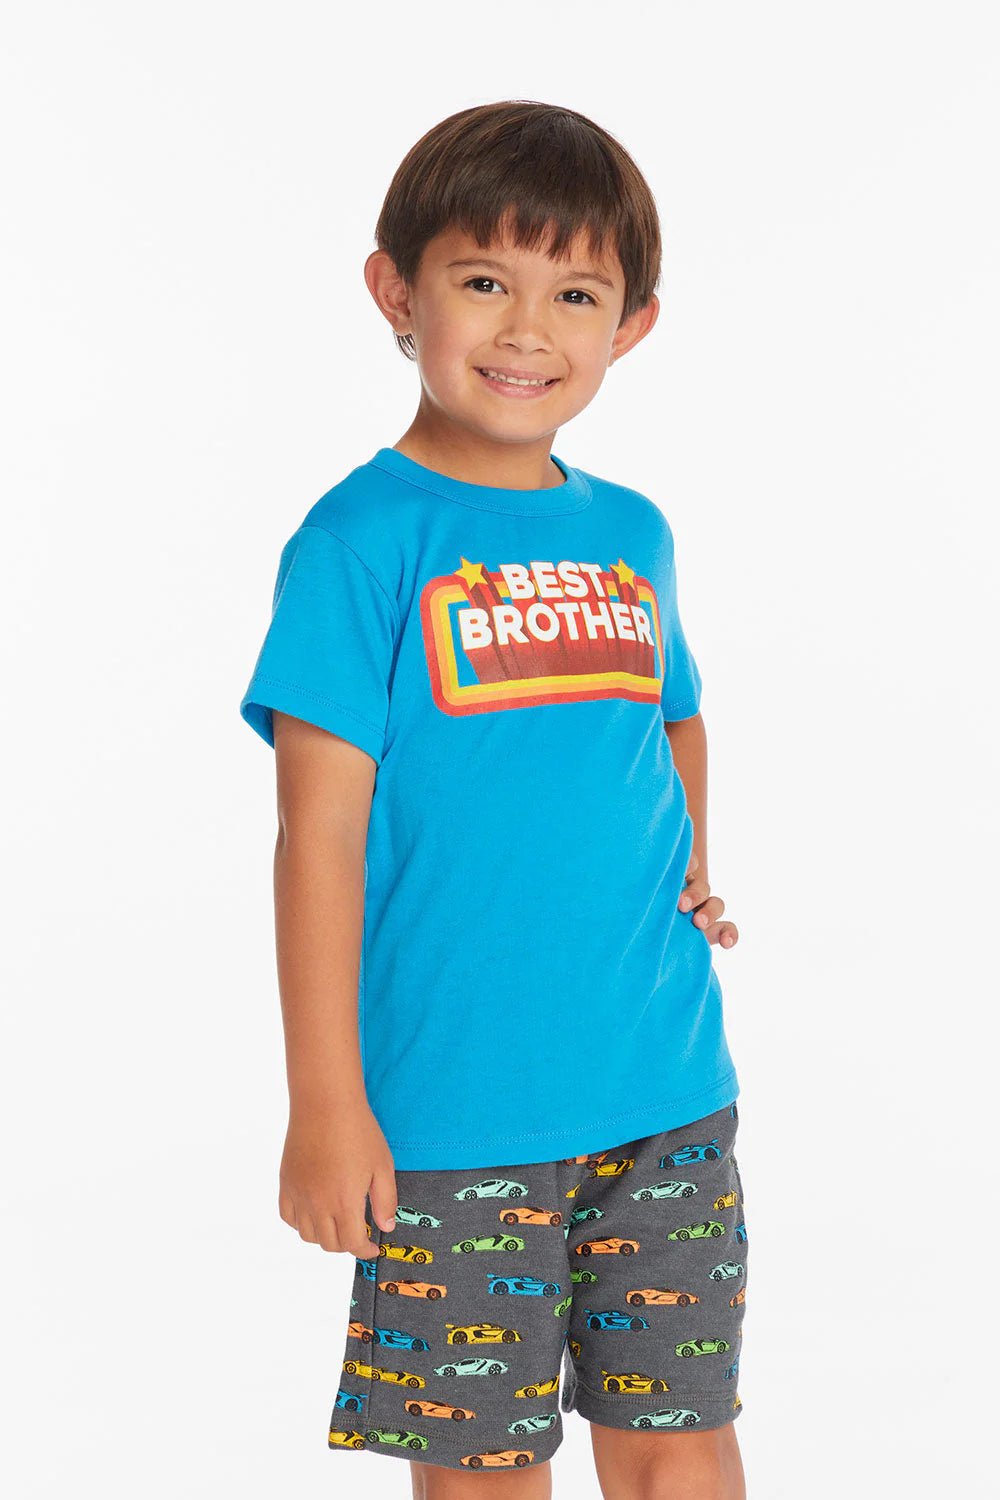 Chaser Best Brother Boys Tee in Blue Danube - Estilo Boutique